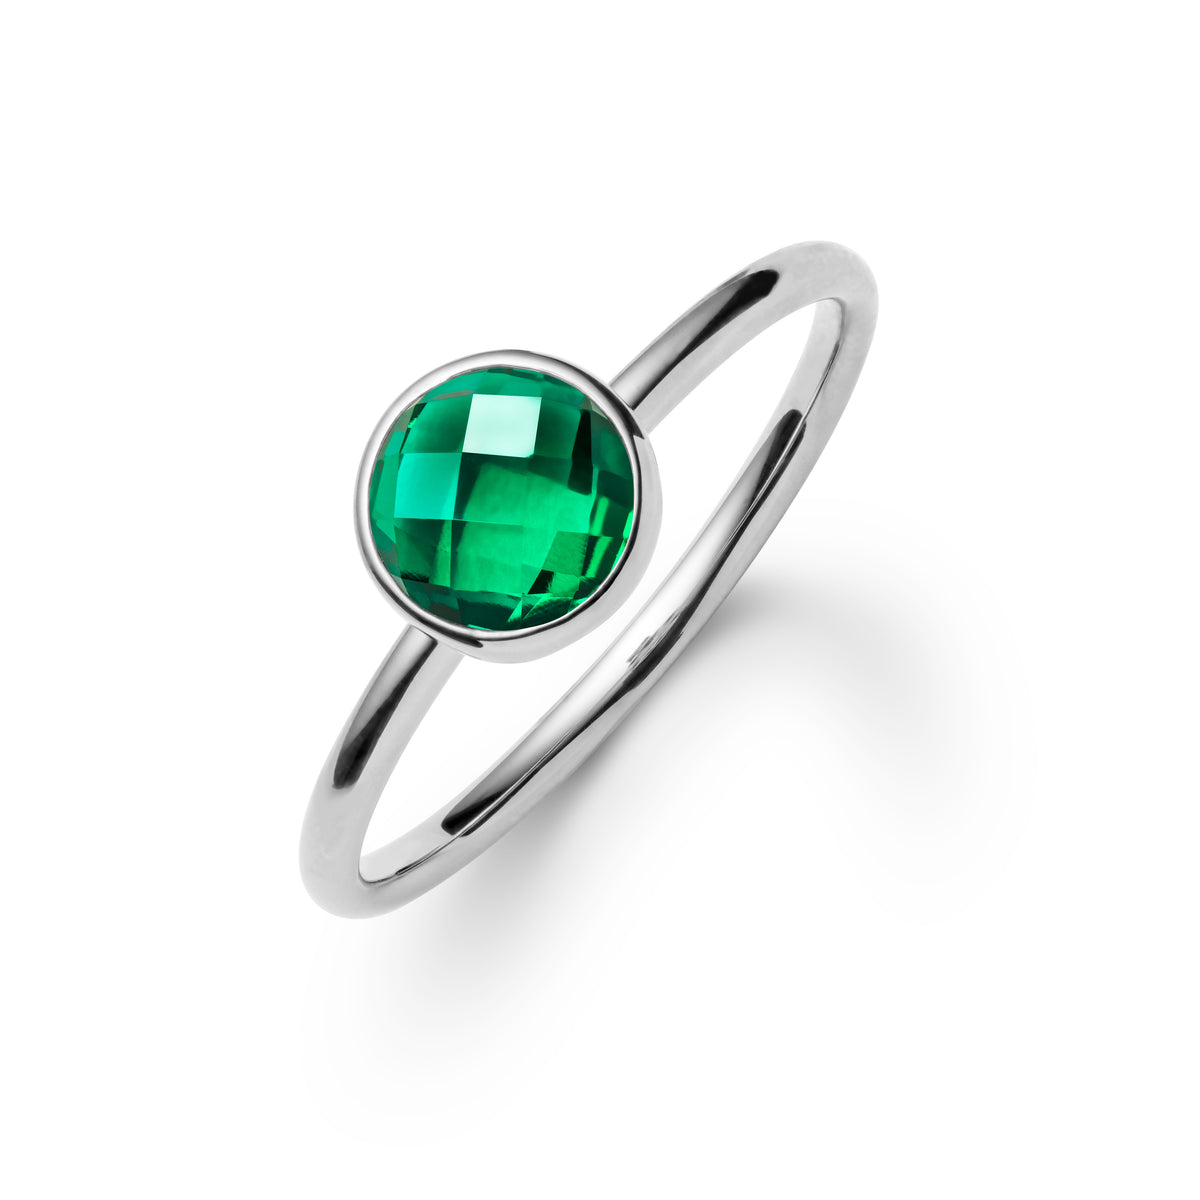 Buy Emerald Stone Ring Online In India - Etsy India